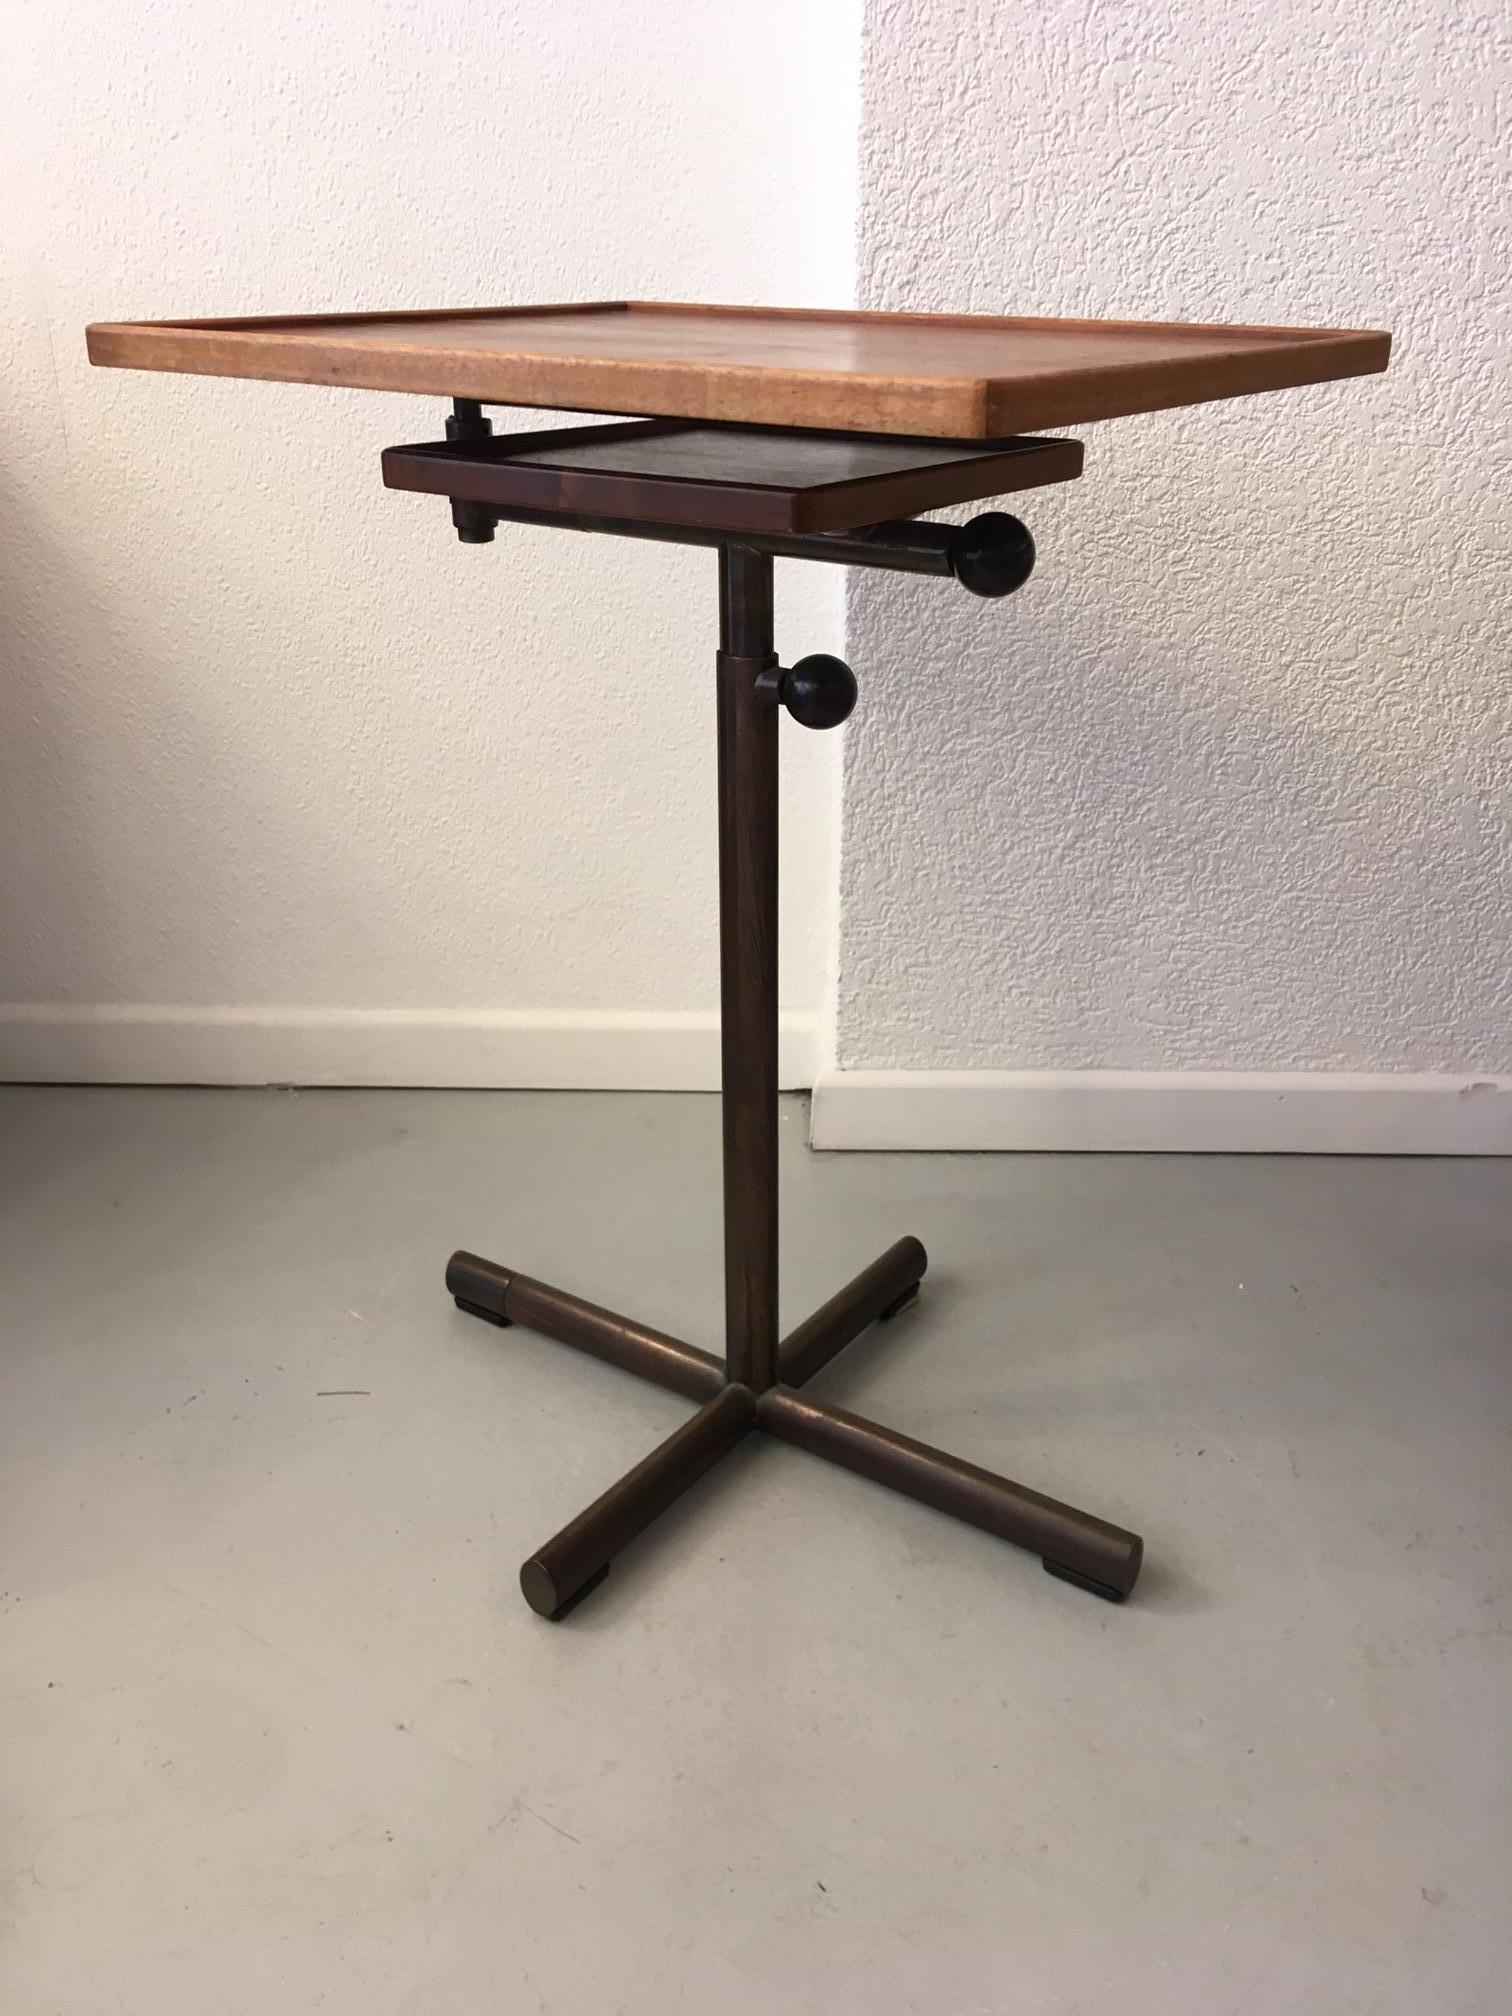 Vintage adjustable walnut and steel table by François Caruelle produced by Embru-Werke, Switzerland, circa 1942

Measures: Large tabletop width 50 cm x depth 40 cm
Small tabletop width 25 cm x depth 25 cm
Height from 65 to 100 cm

The large